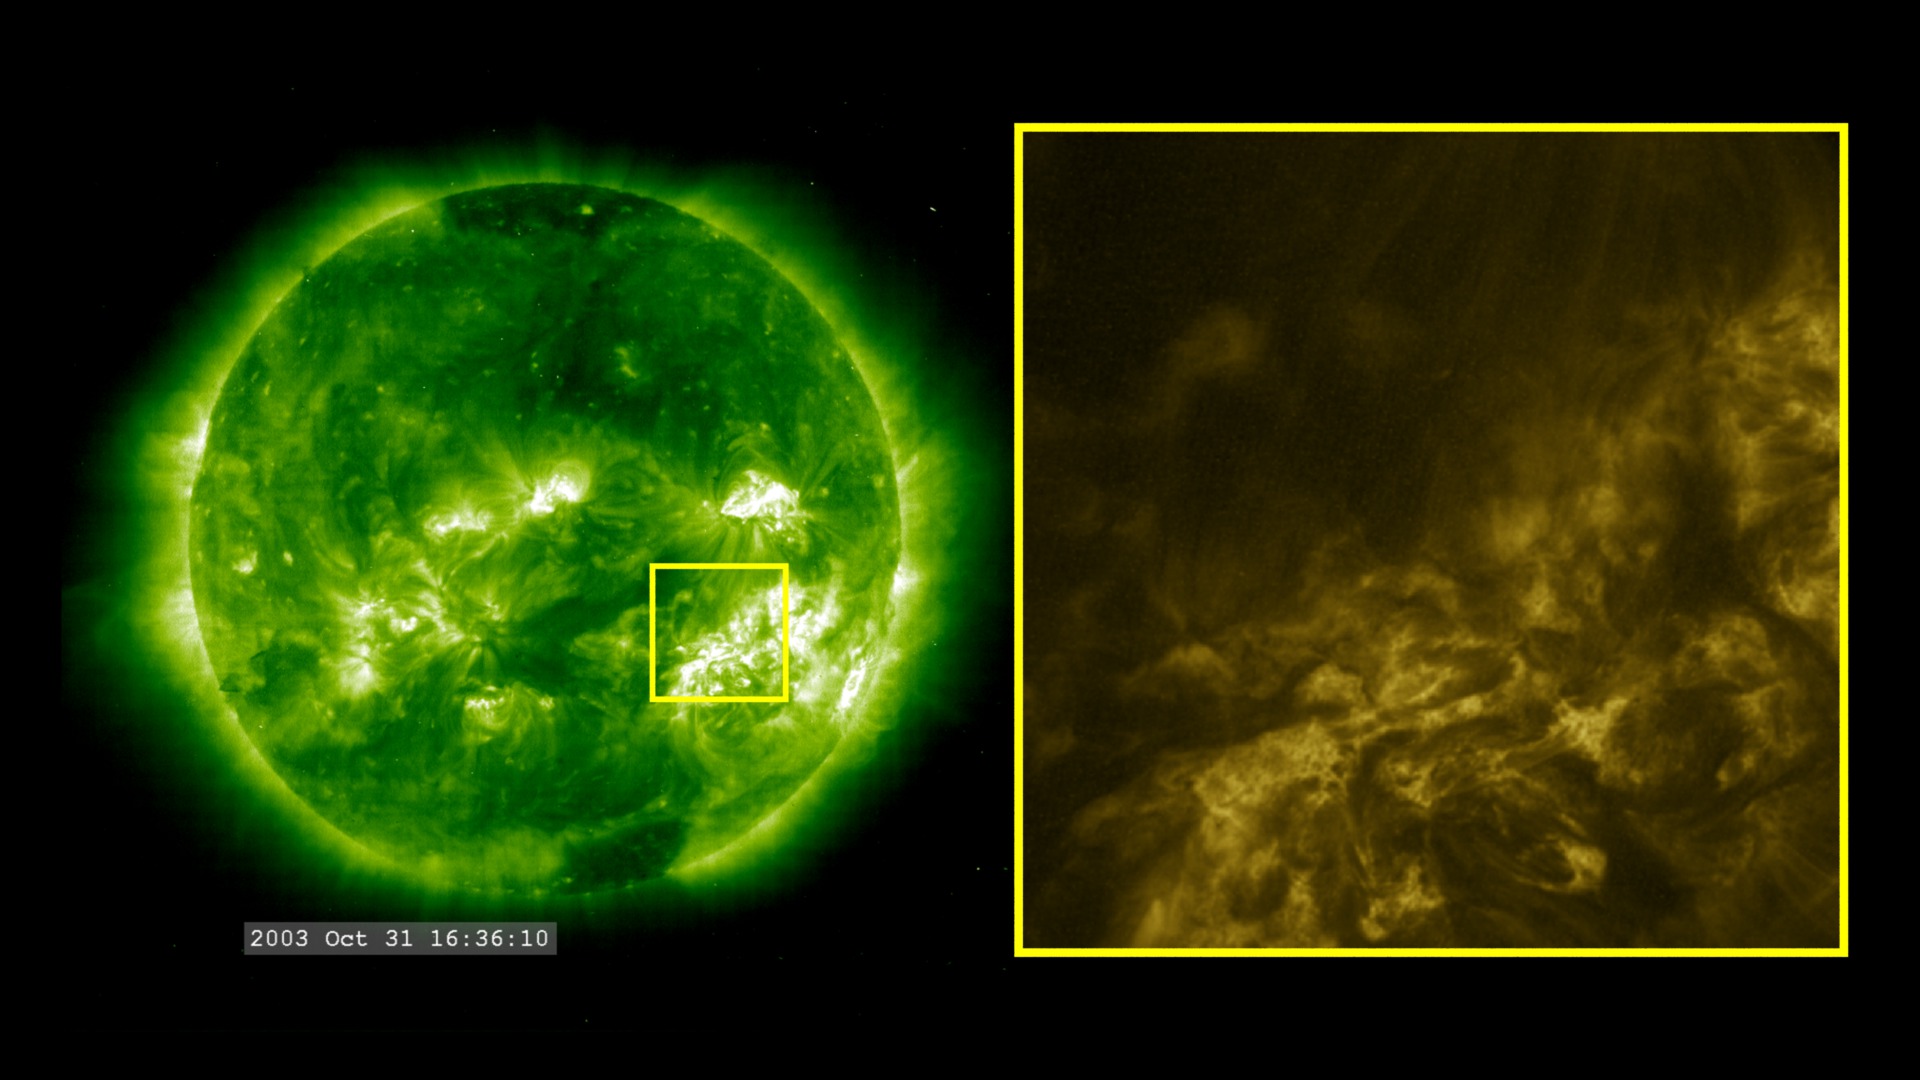 A synchronous play of SOHO/EIT (left) and TRACE (right) imagery from the 2003 Halloween Solar Storms.